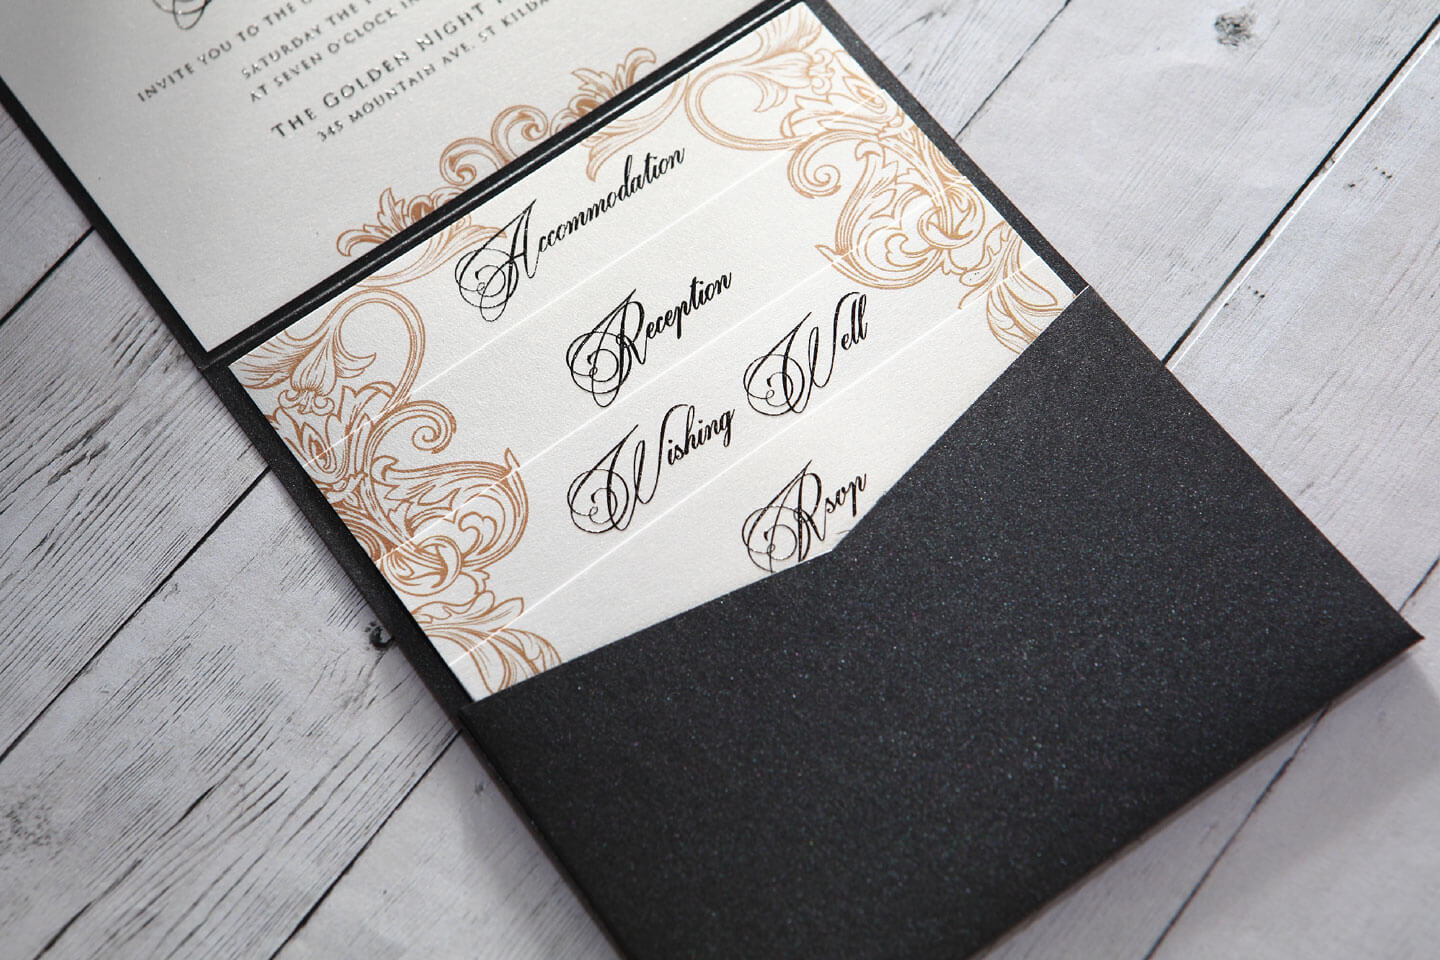 1920s wedding stationery by adorn invitations for Chris and Bens gay wedding gatsby themed gay wedding guide 3 5